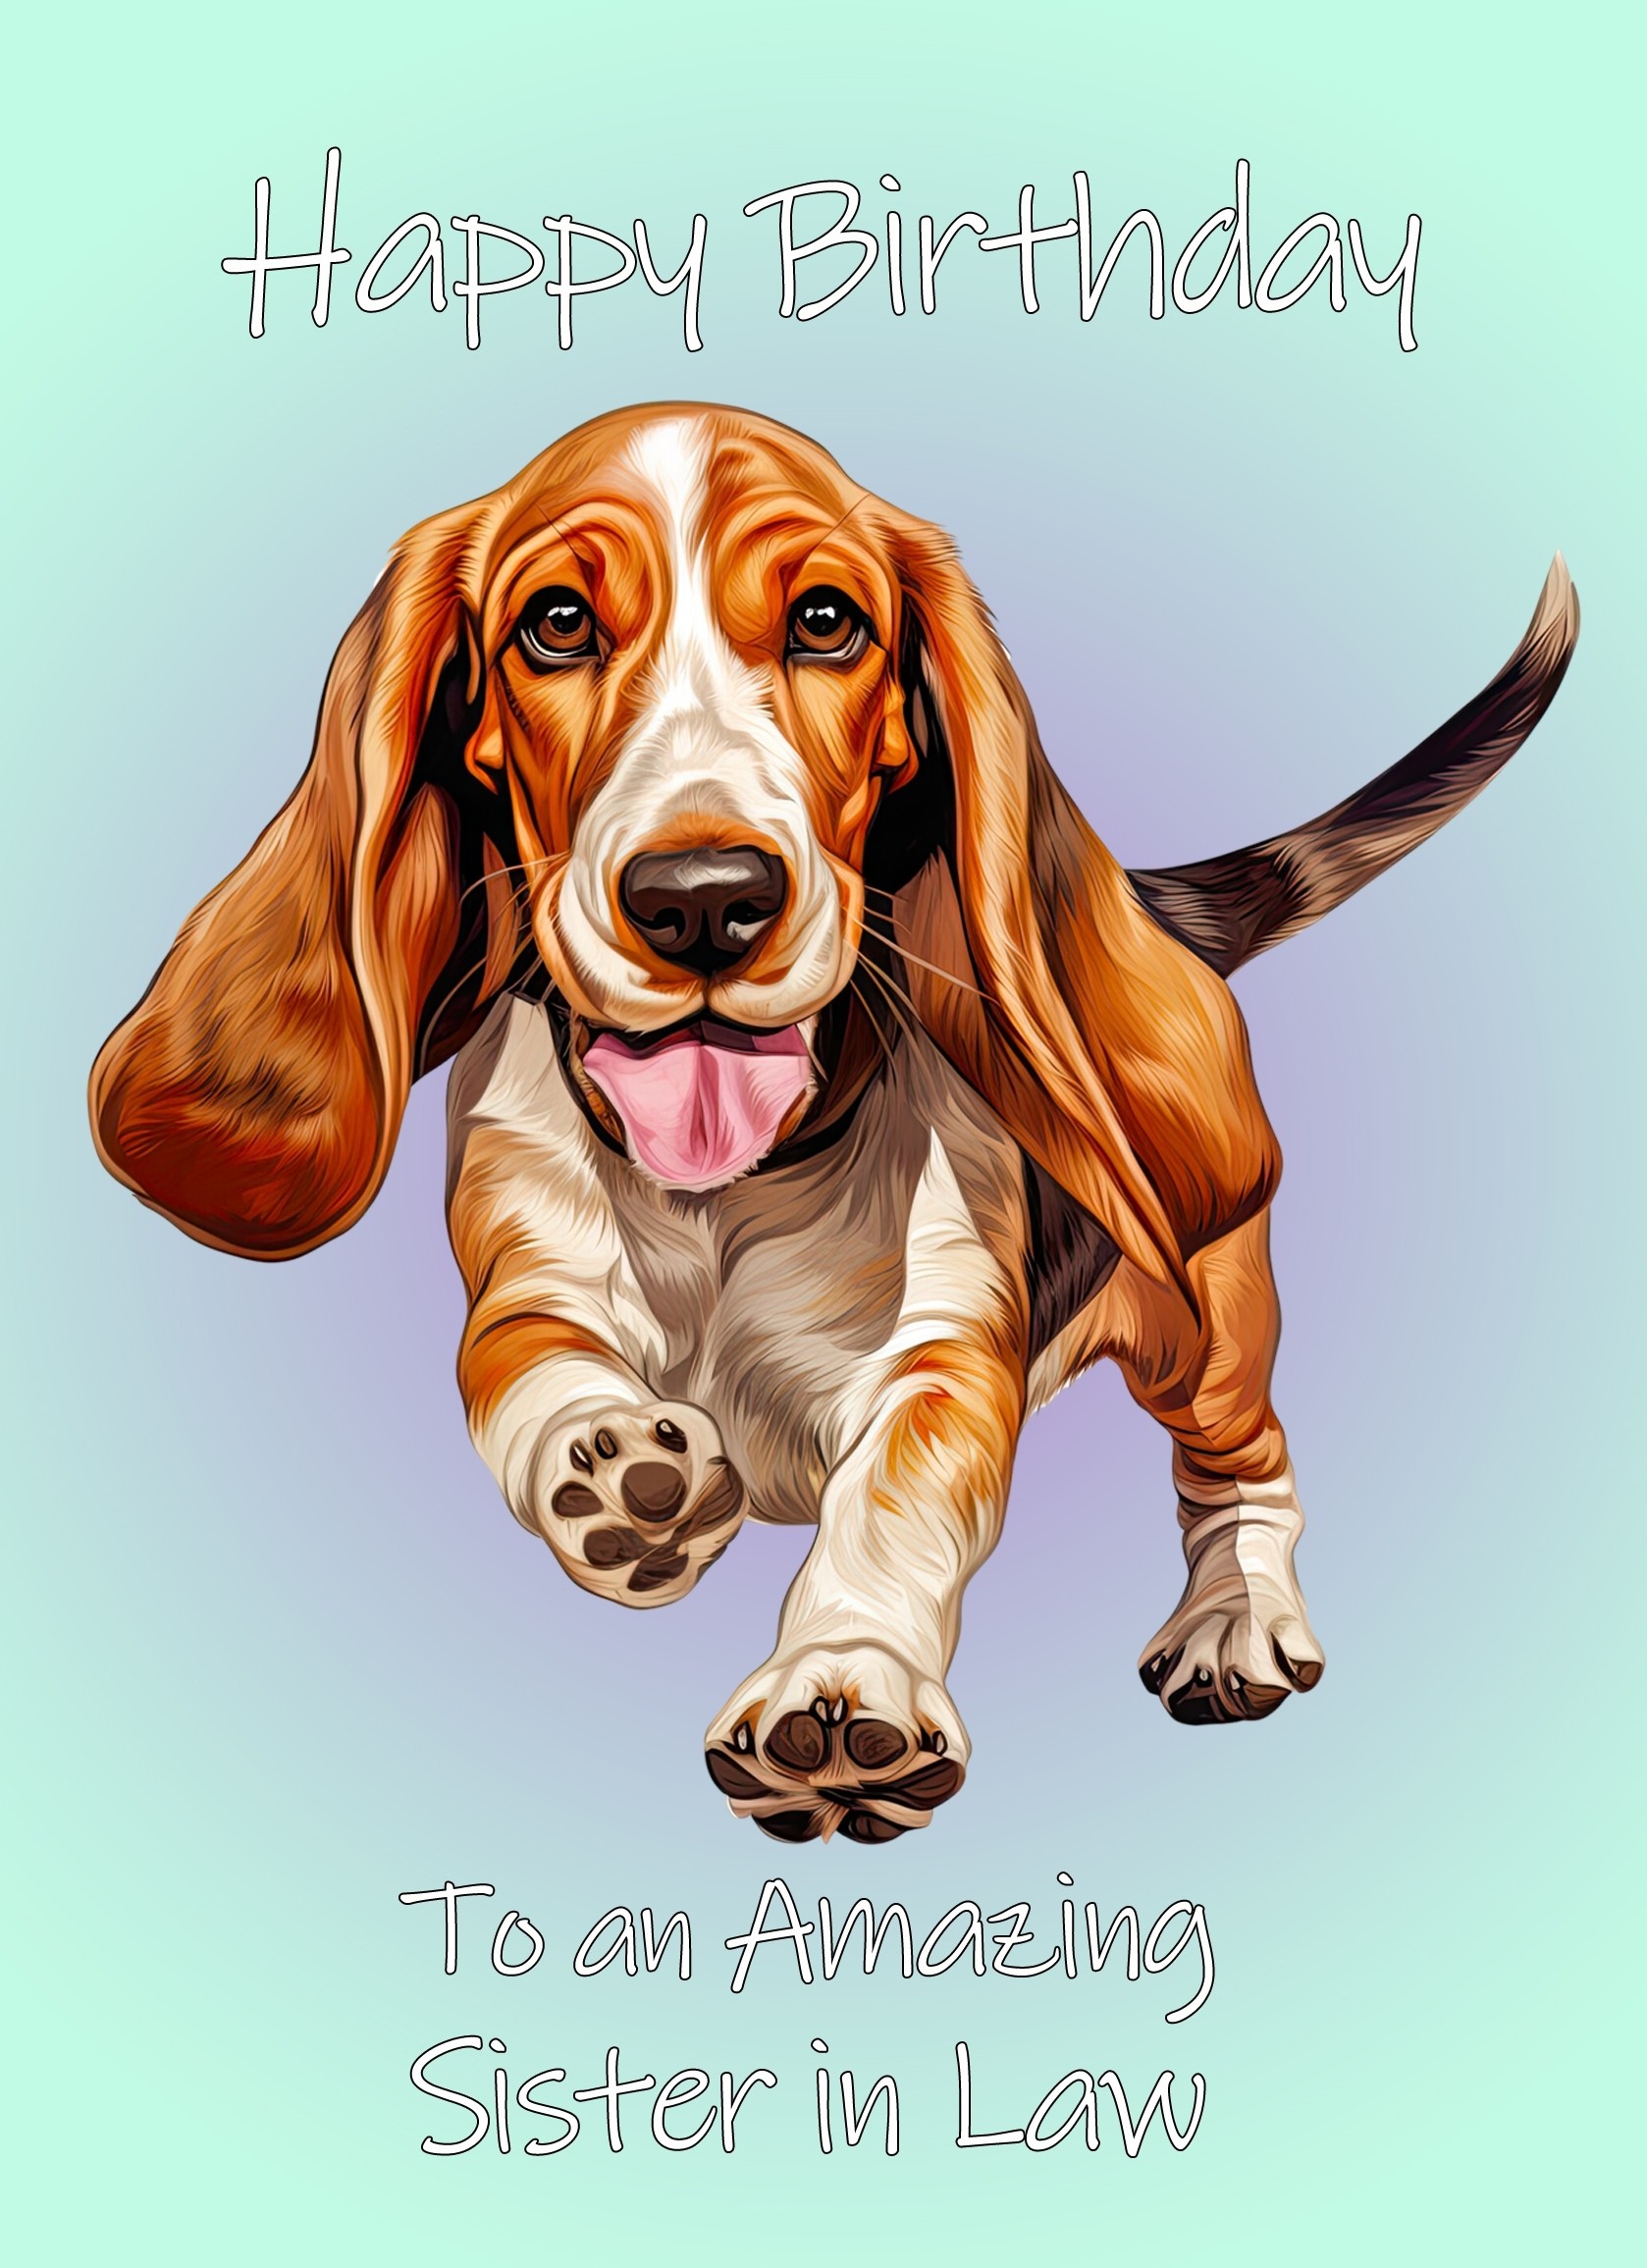 Basset Hound Dog Birthday Card For Sister in Law